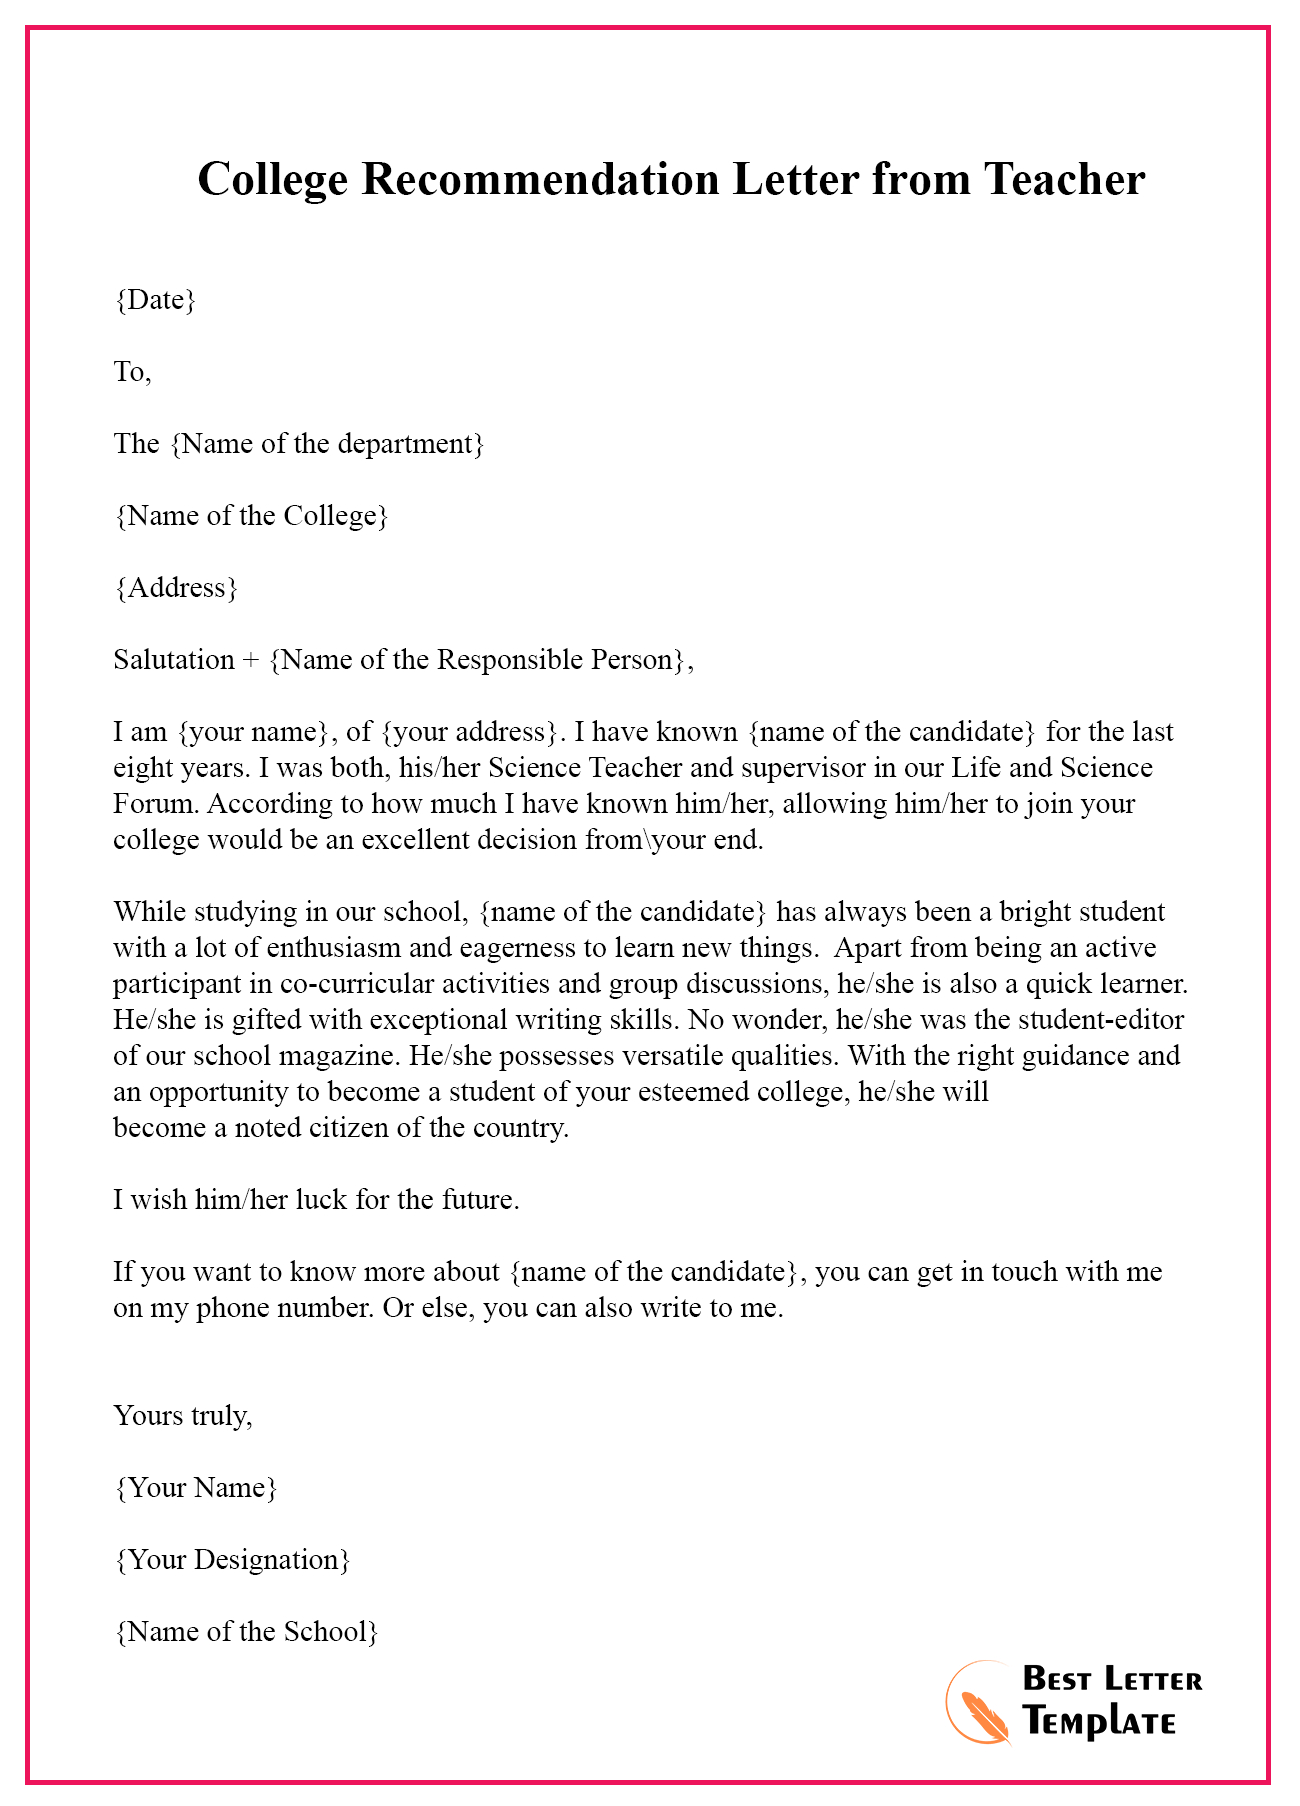 College Recommendation Letter From Teacher Best Letter with sizing 1300 X 1806